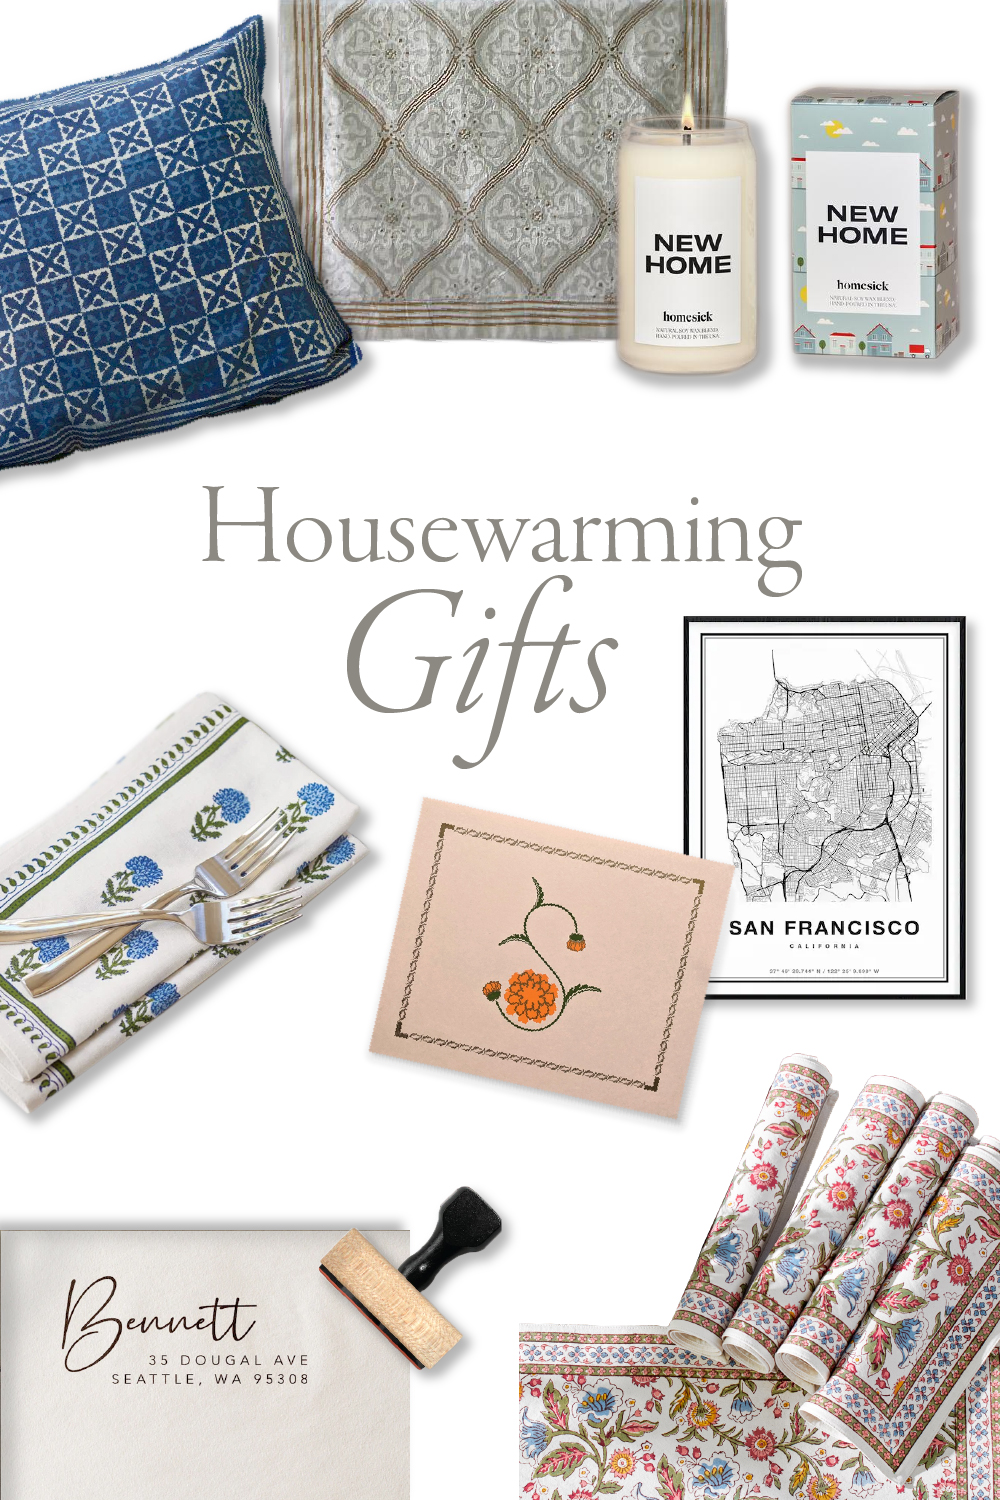 12 Useful Housewarming Gifts So Good You'll Want To Keep Them – BlissLights